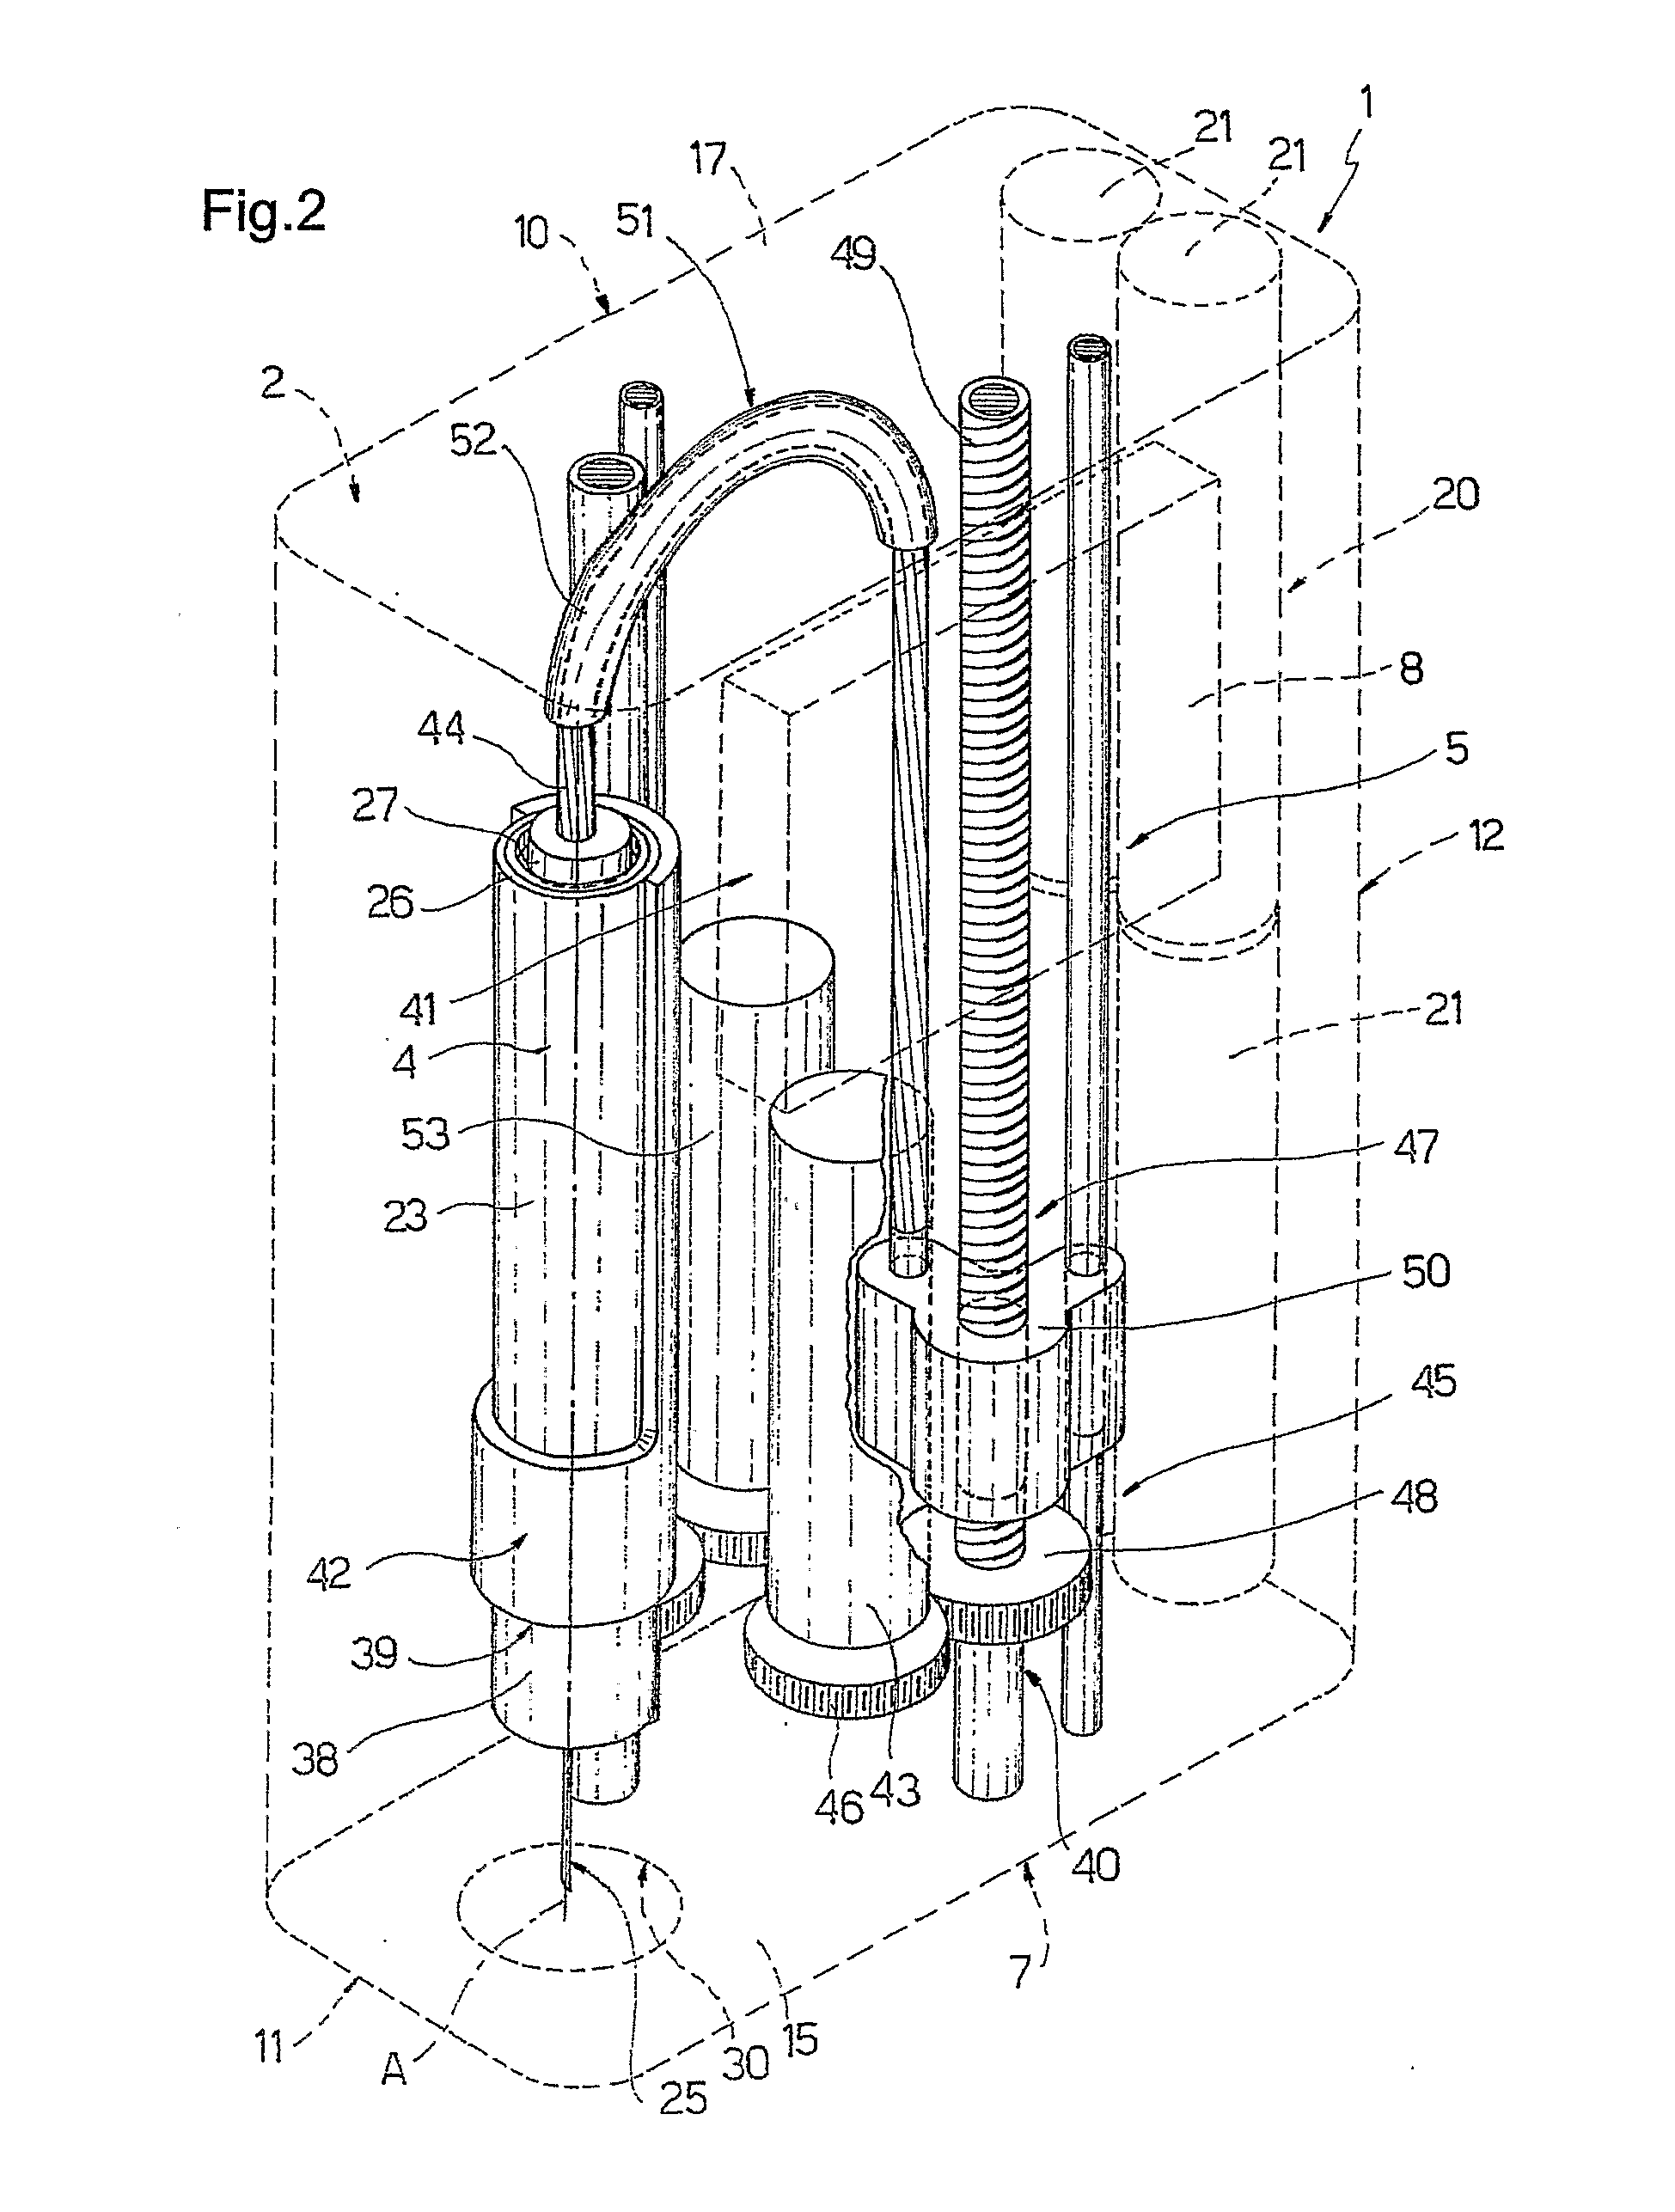 Hand-held electronically controlled injection device for injecting liquid medications